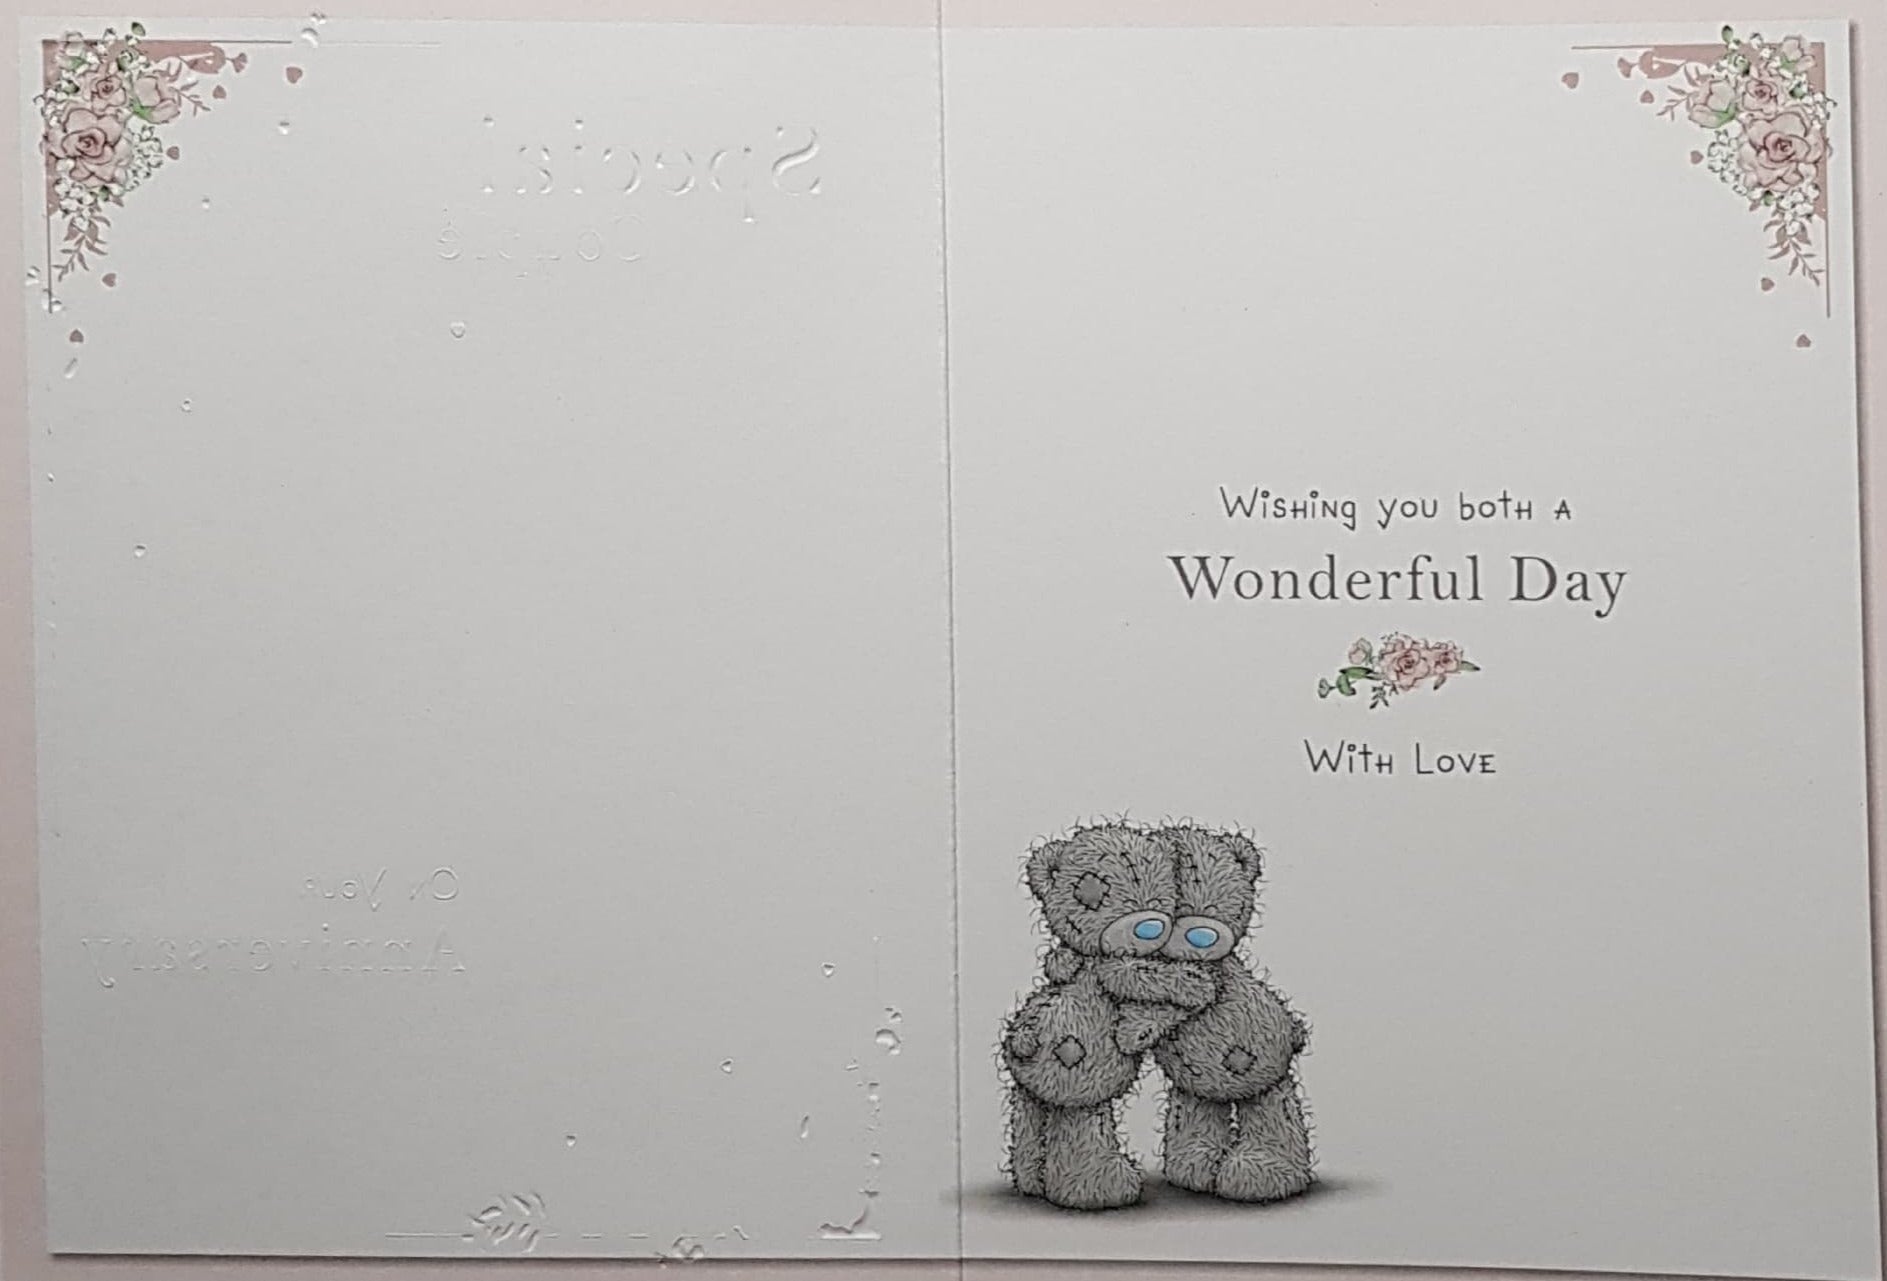 Anniversary Card - Special Couple / Pink Flower Branches & Small Hearts